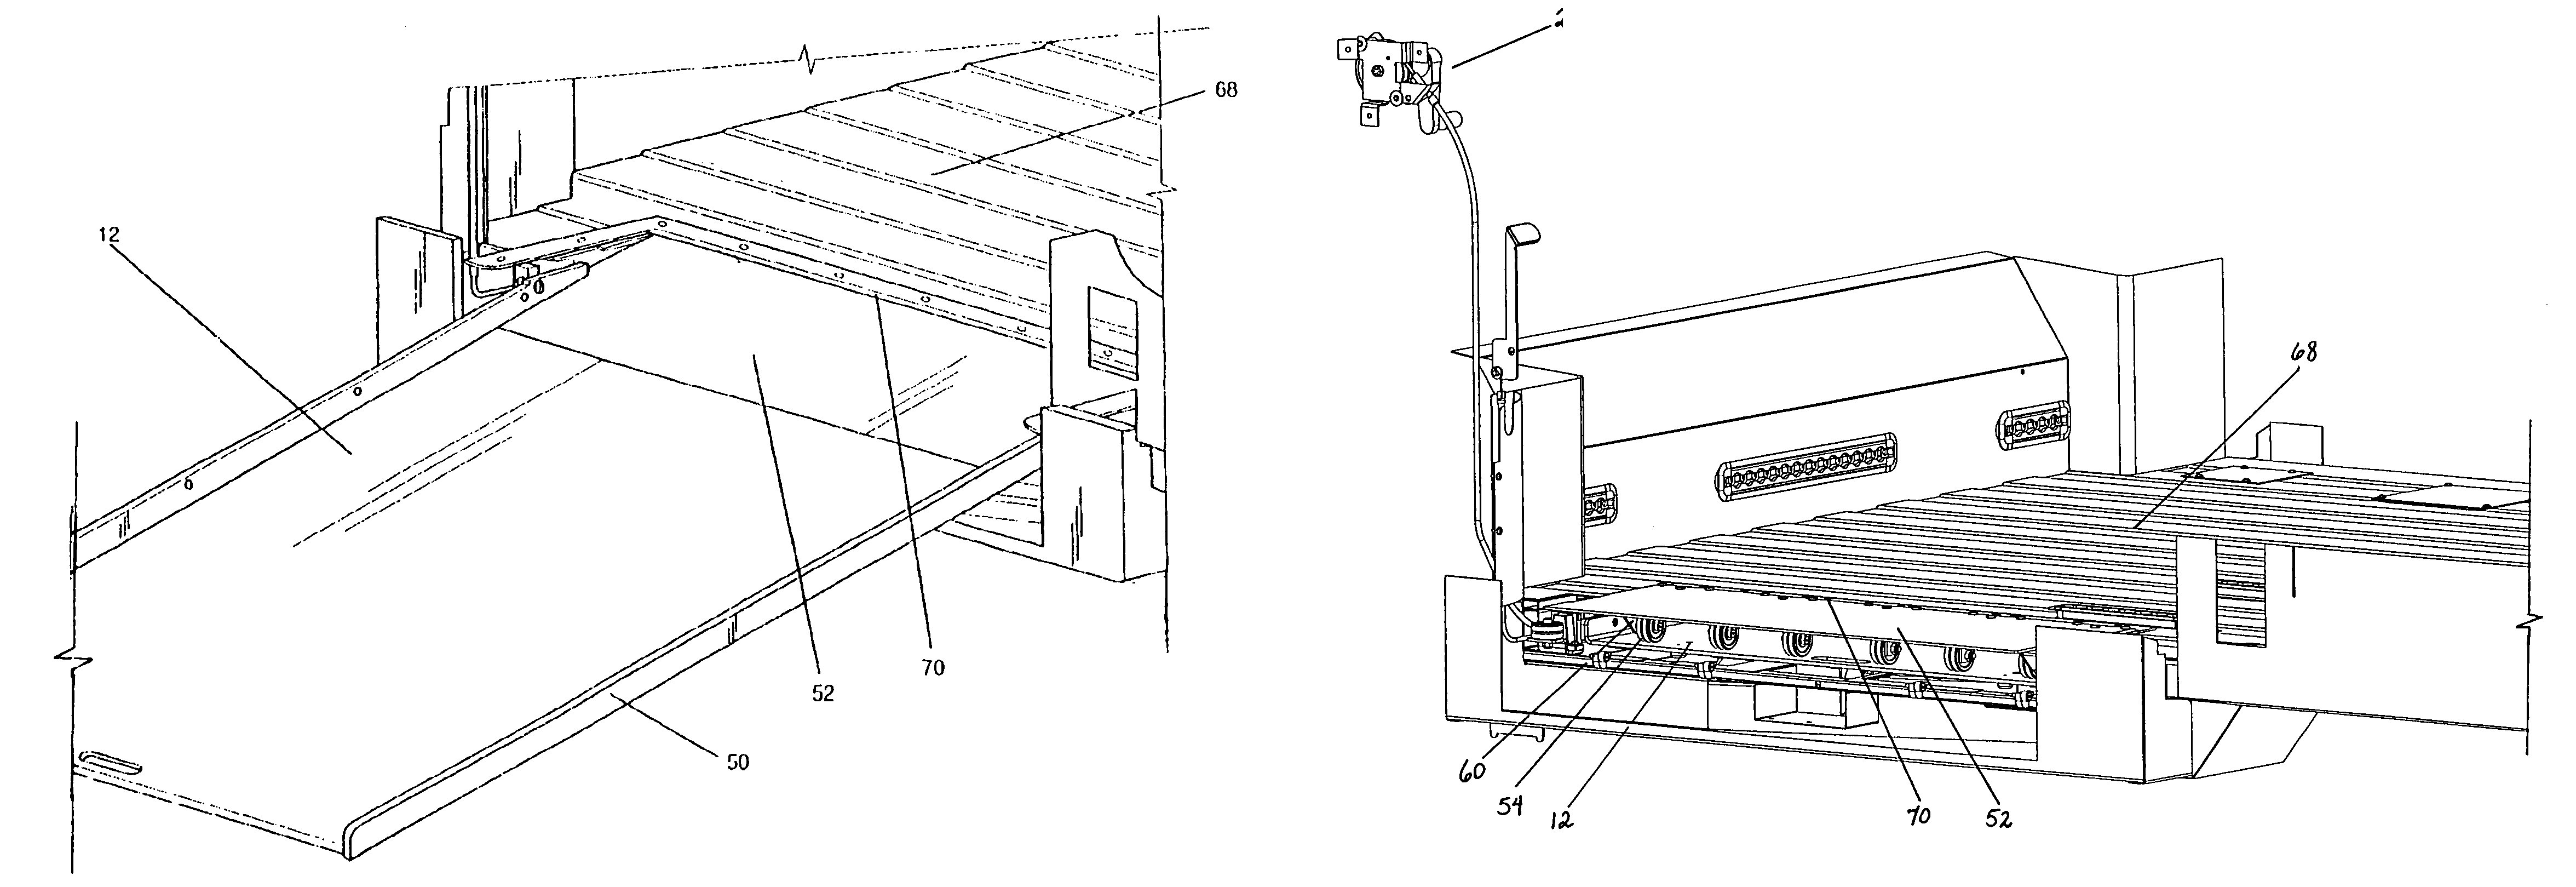 Retractable ramp system for a mobility vehicle